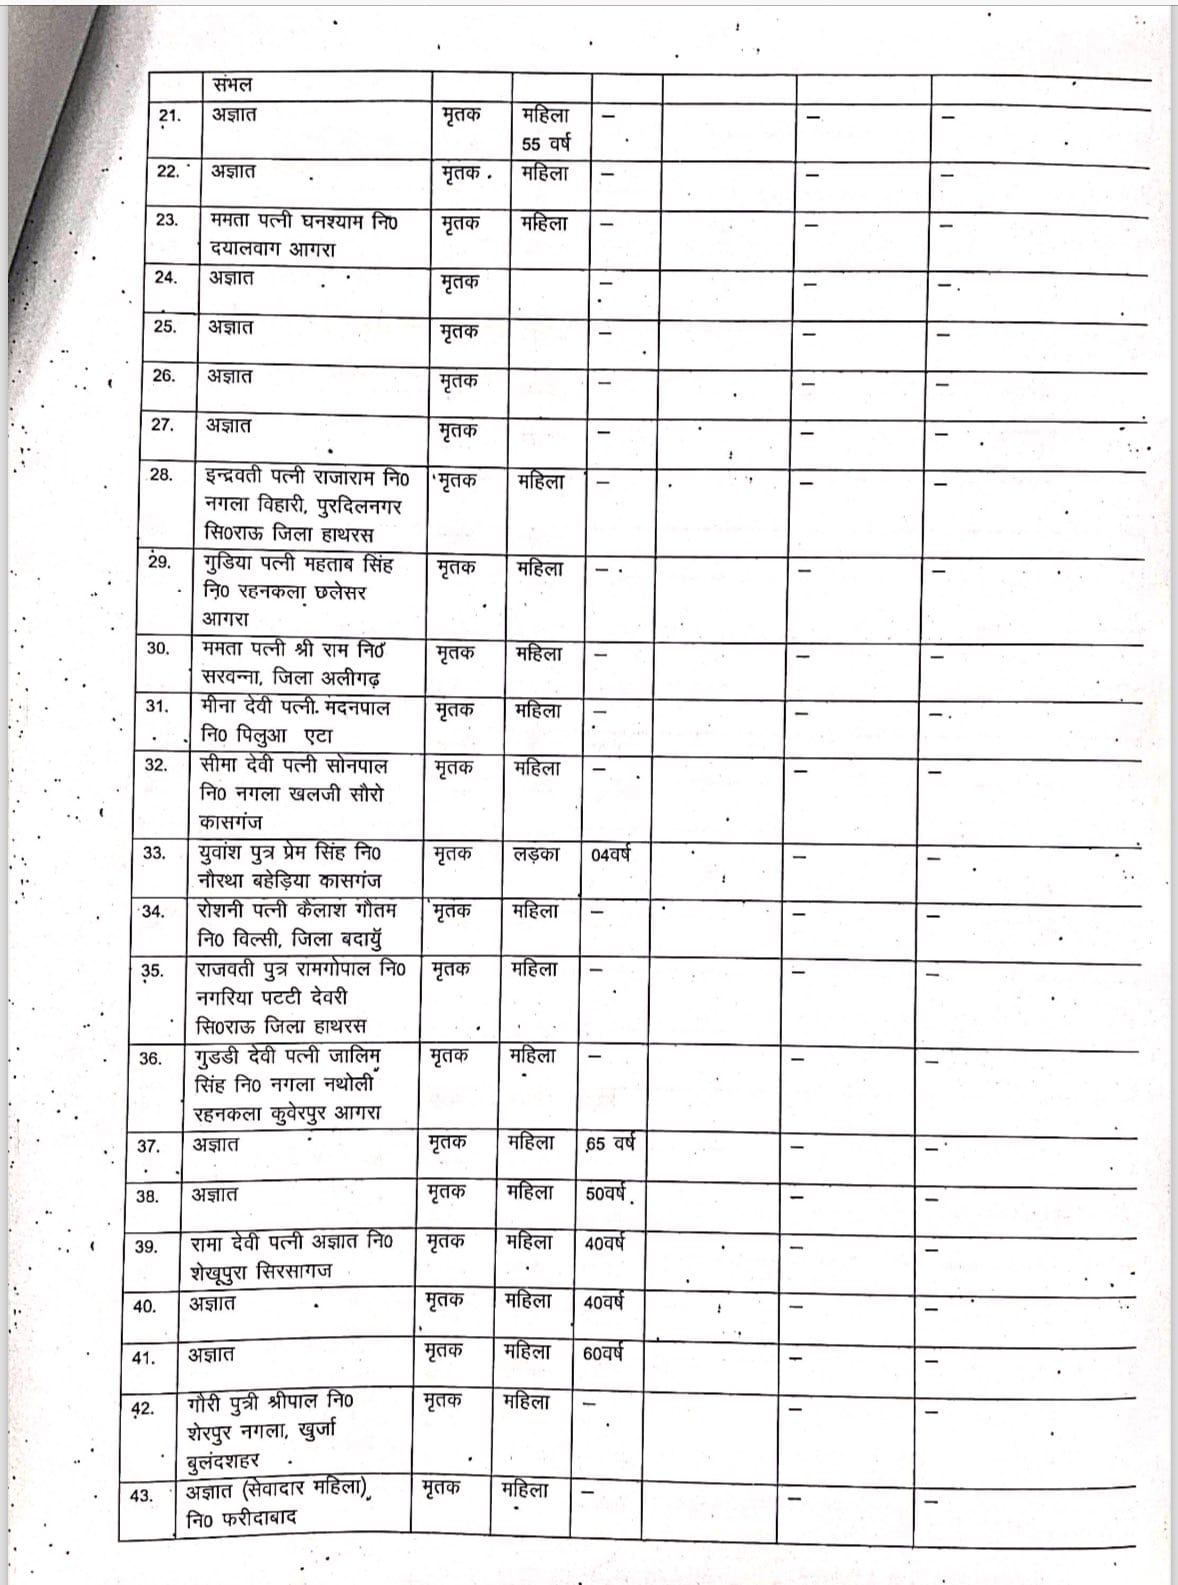 hathras satsang stampede update list of 116 dead body names and helpline numbers released by administration